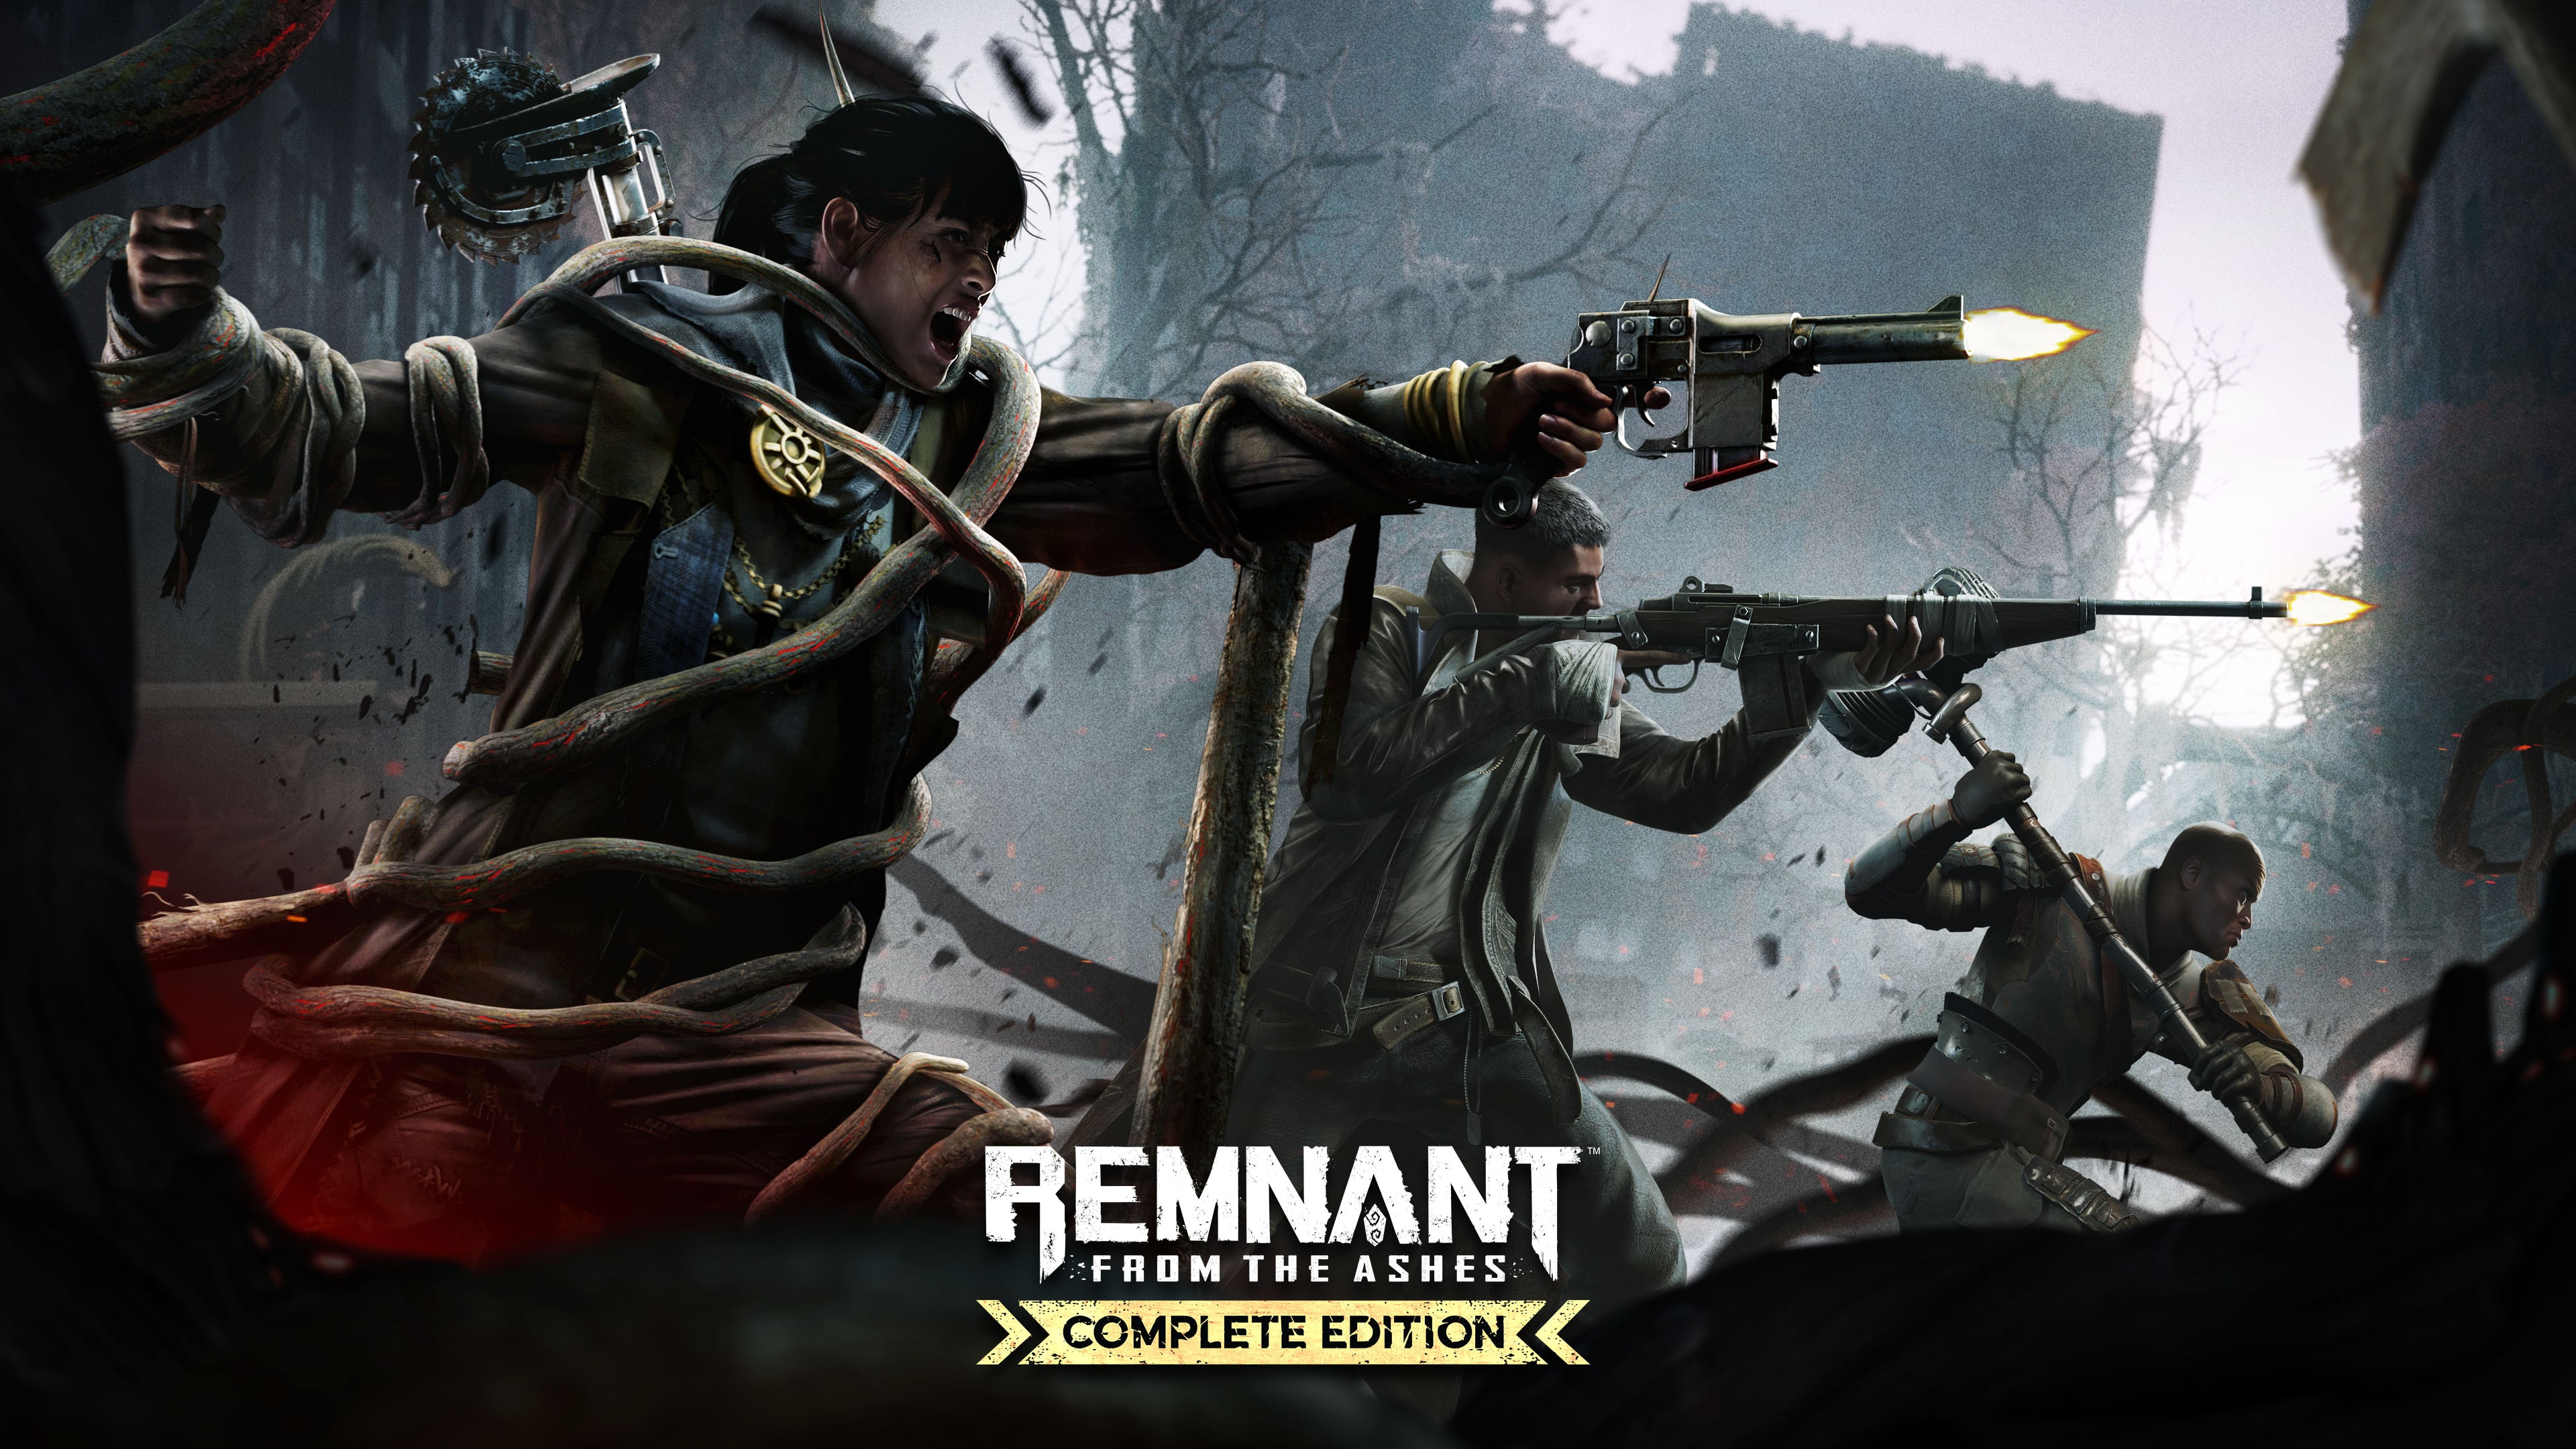 Remnant: From the Ashes – Complete Edition